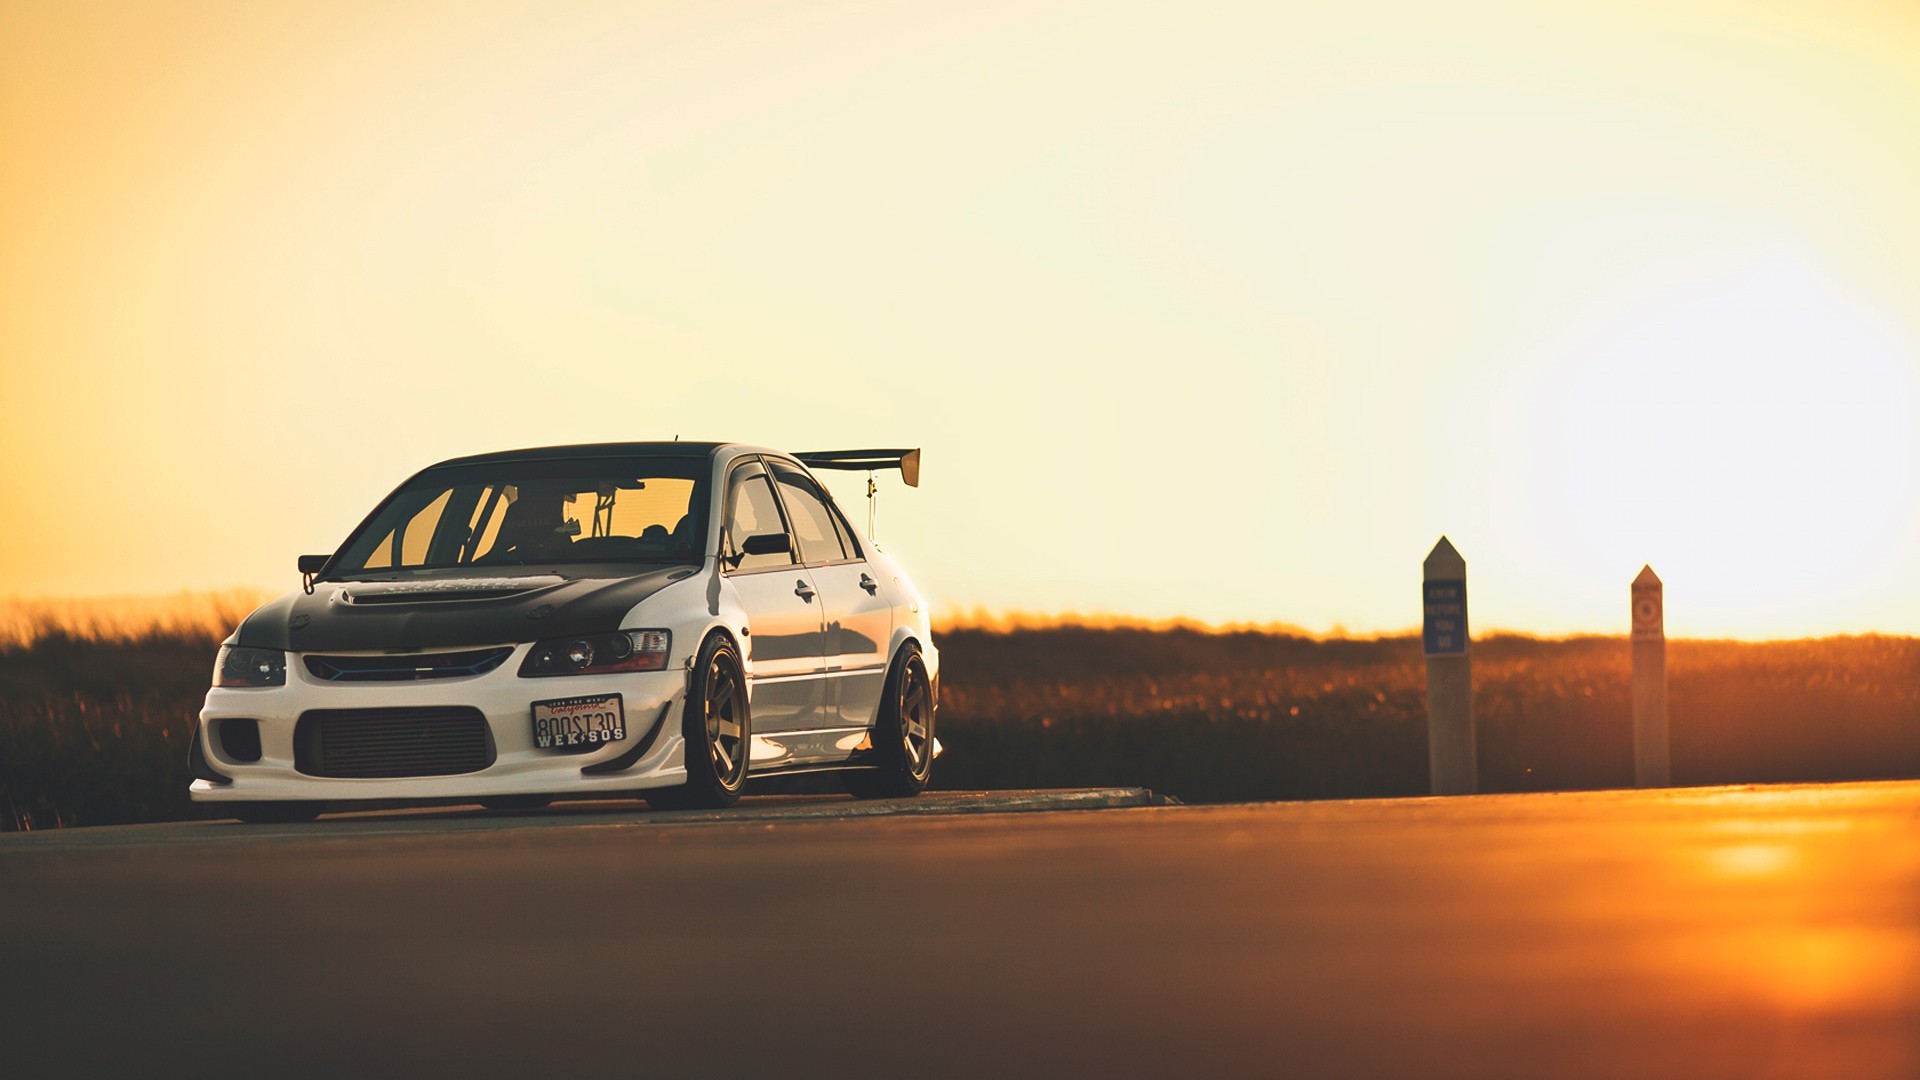 Mitsubishi evo stands on the side of the road at sunset.